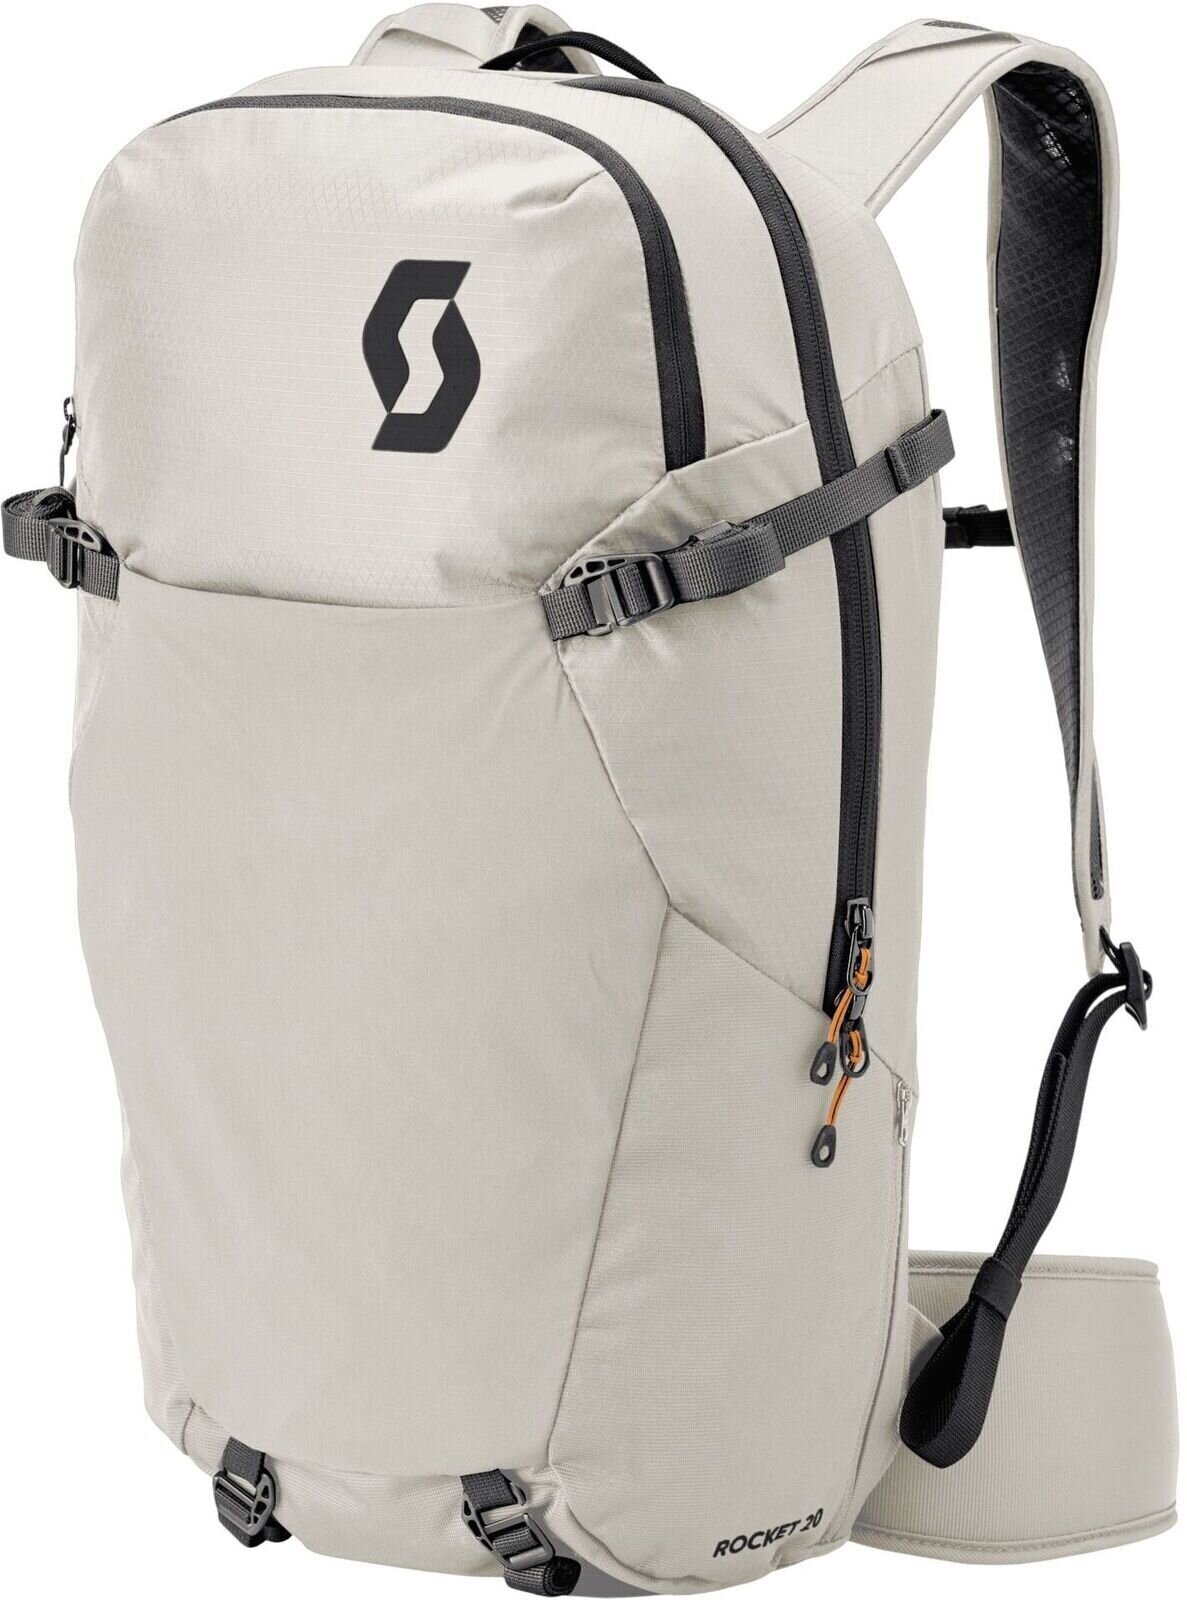 Cycling backpack and accessories Scott Trail Rocket 20 Backpack White